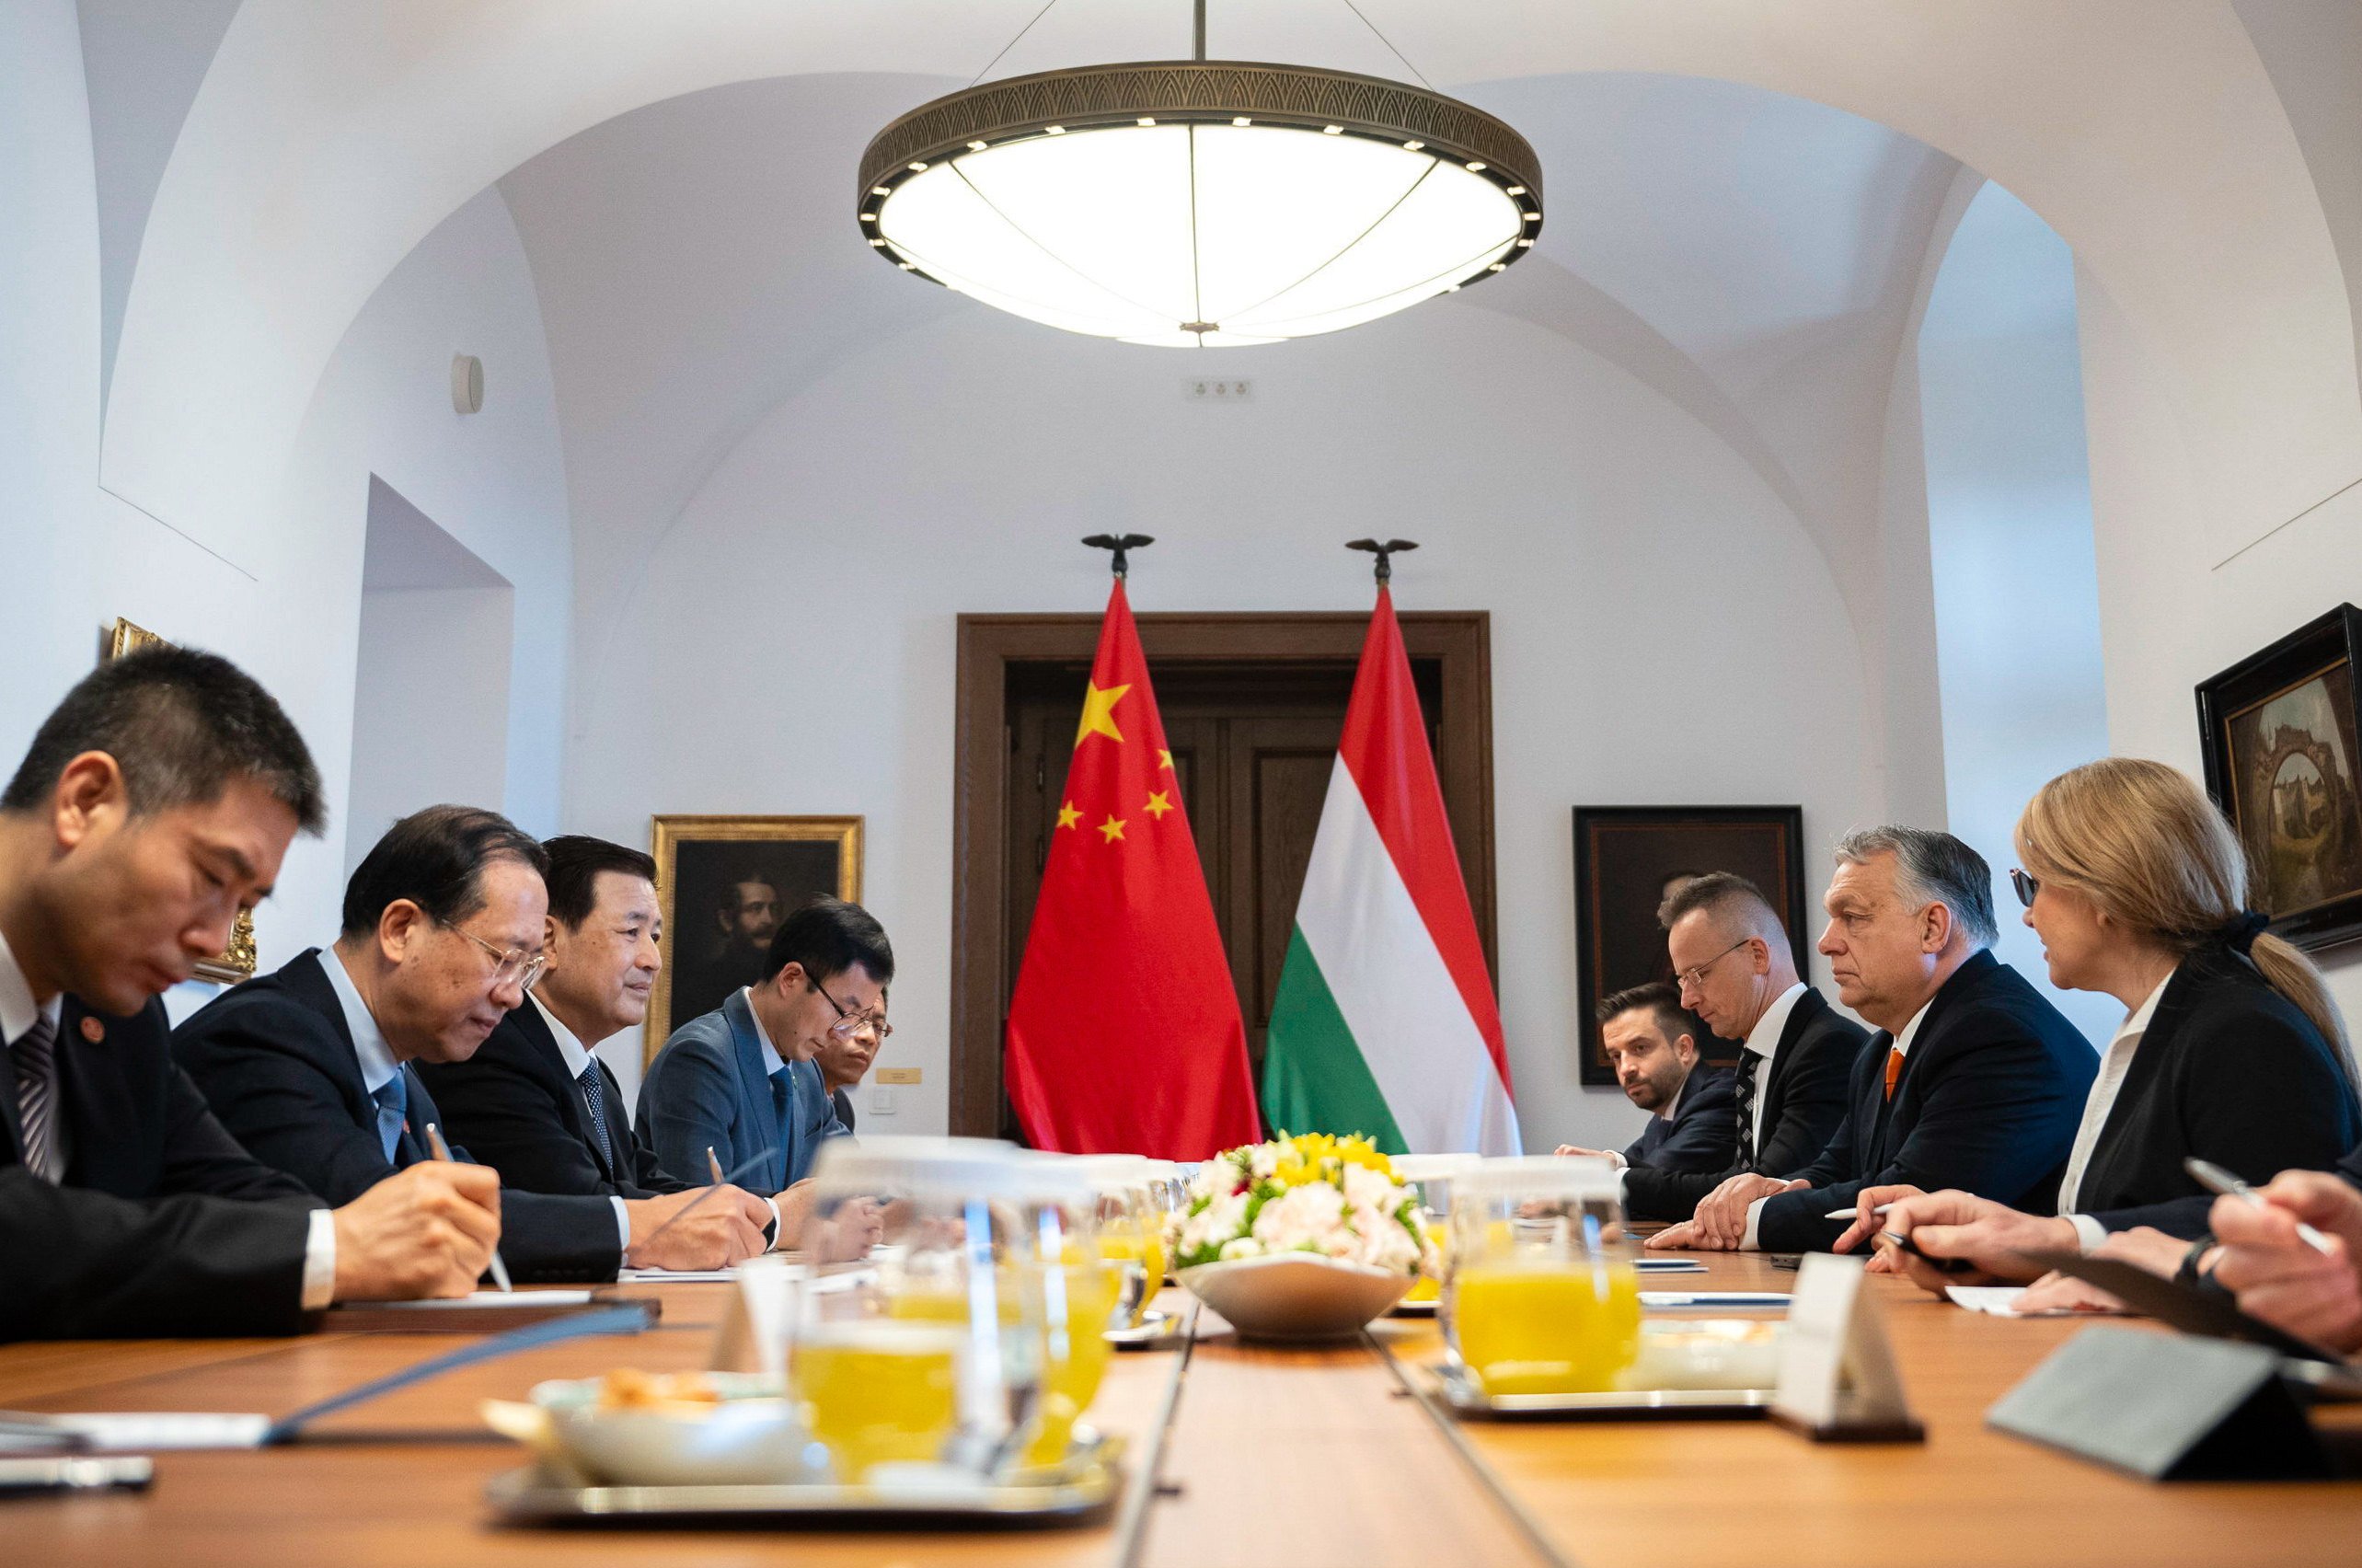 Chinese Public Security Minister Wang Xiaohong (third from left) meets Hungarian Prime Minister Viktor Orban (third from right) at the government headquarters in Budapest, Hungary, on Friday. Photo: EPA-EFE/Hungarian PM’s Press Office